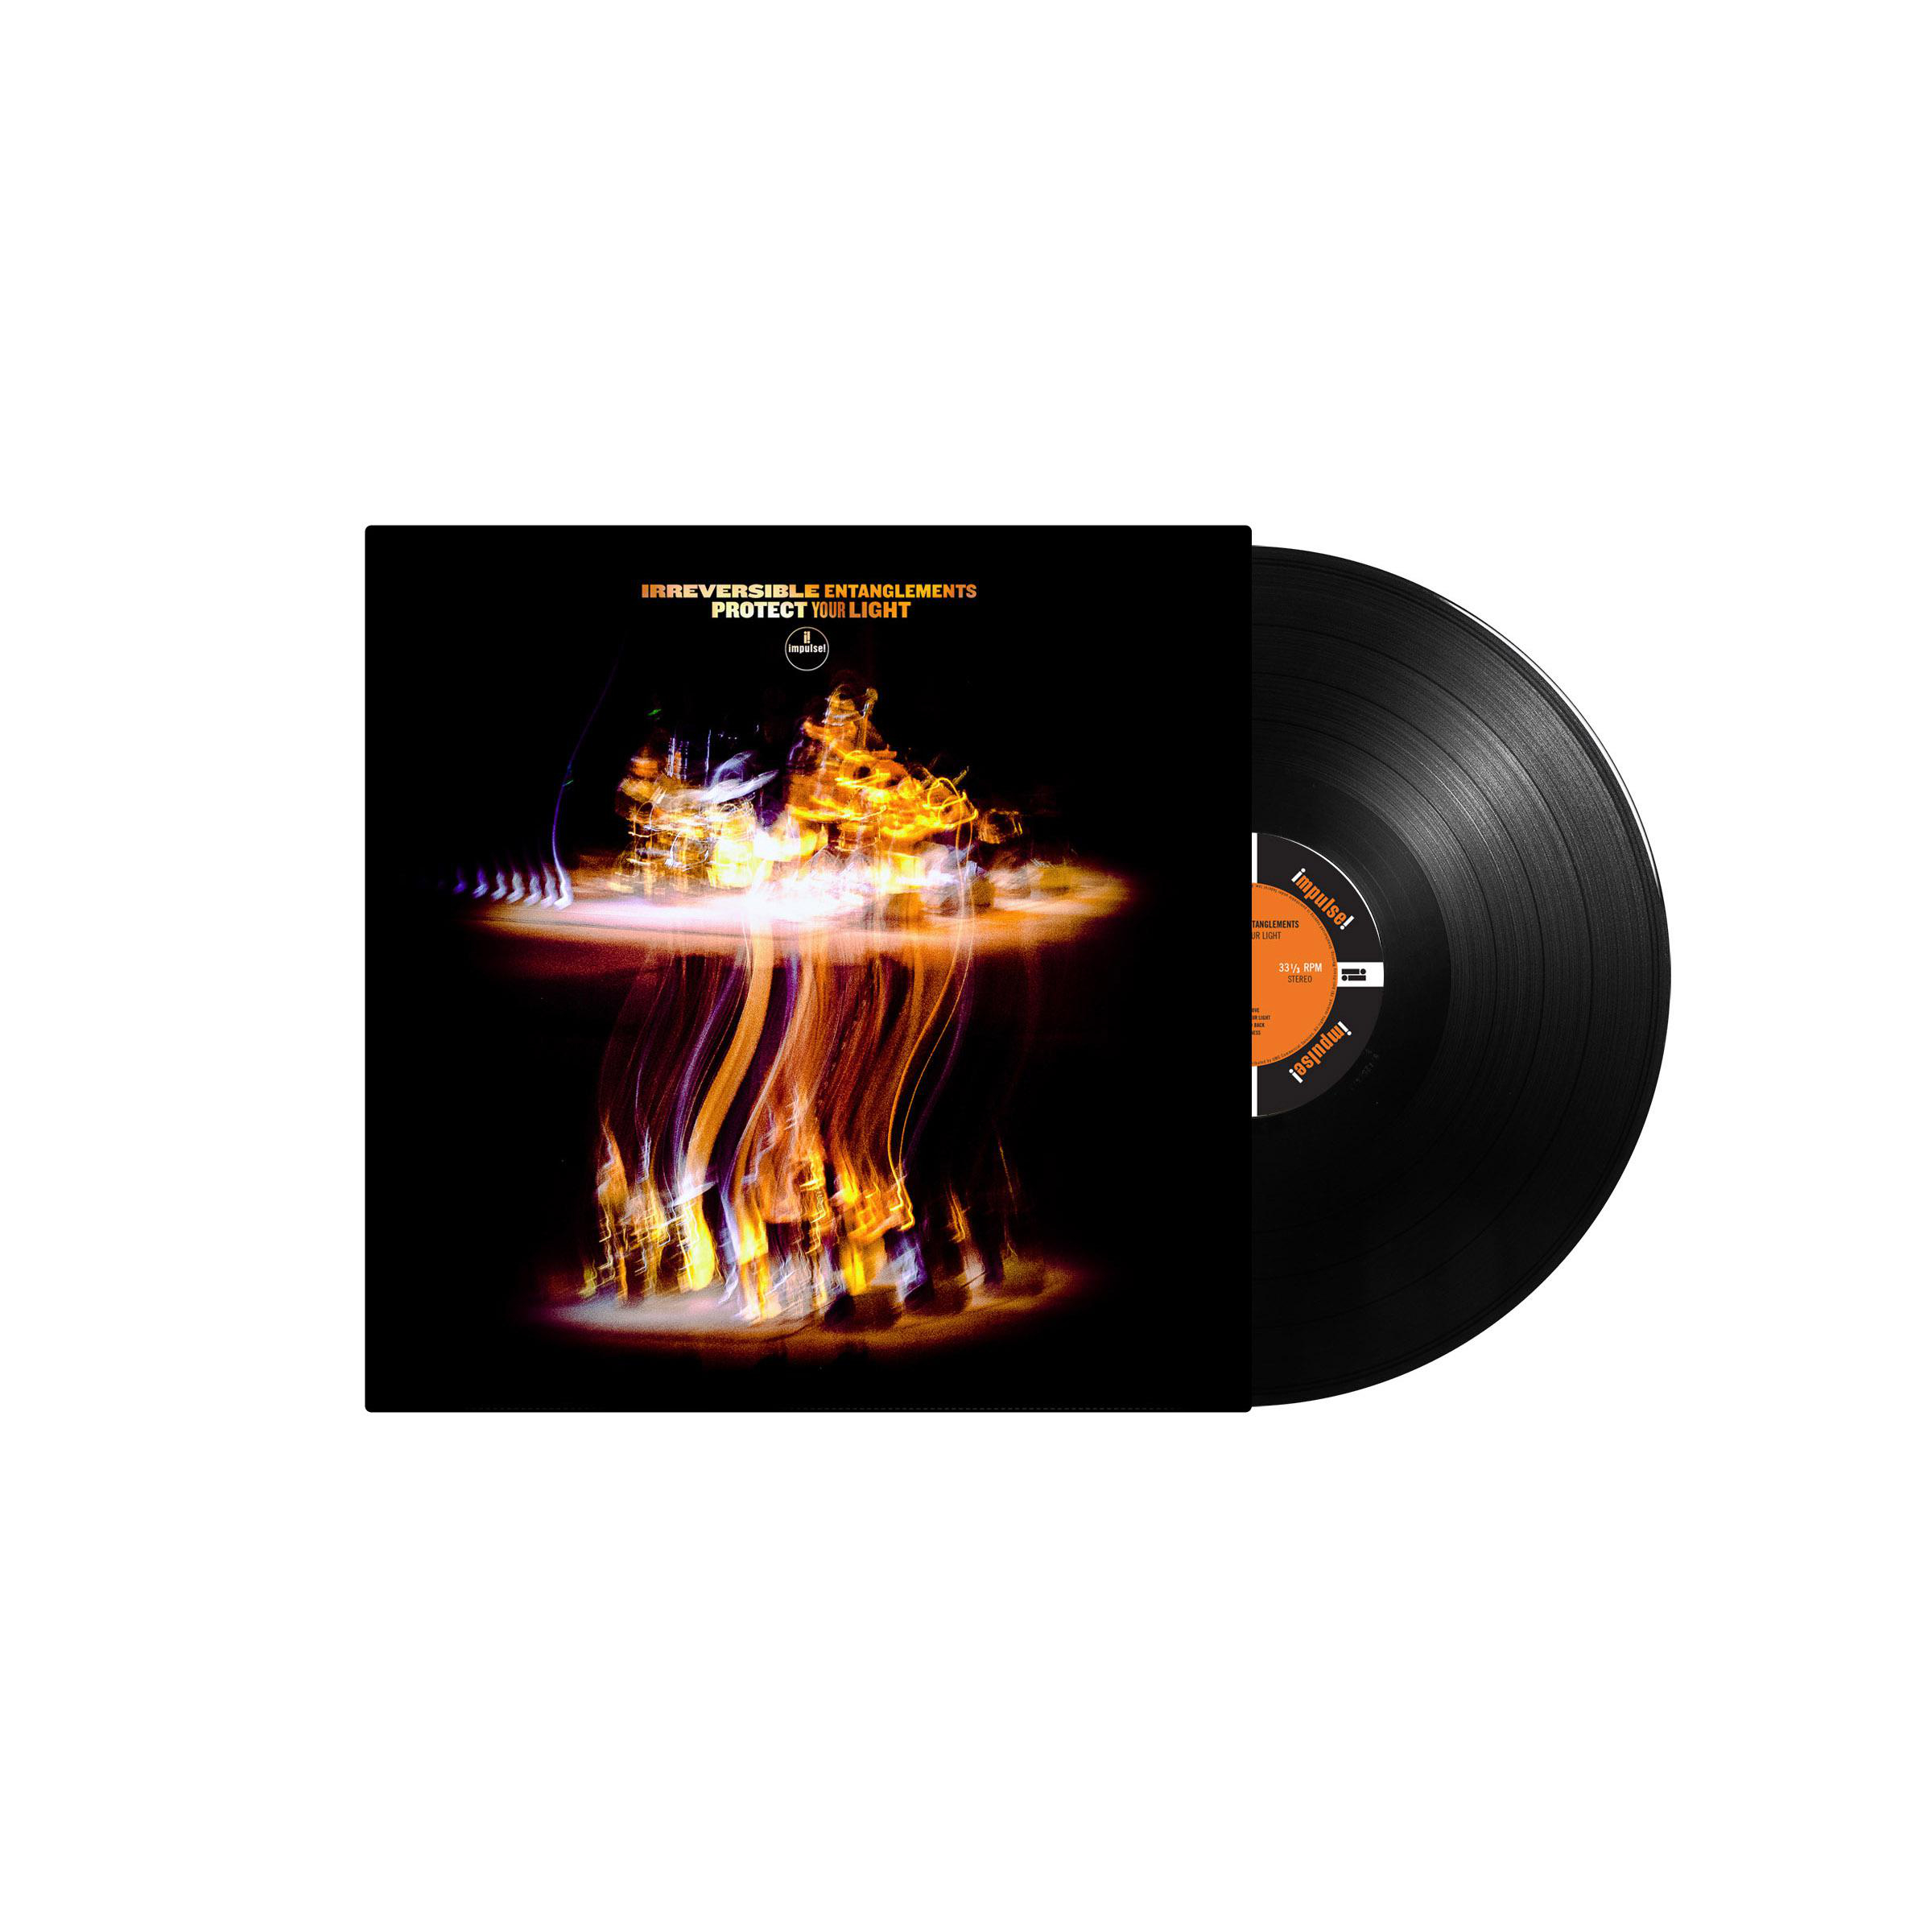 (Vinyl) - Entanglements Your Light Protect - Irreversible